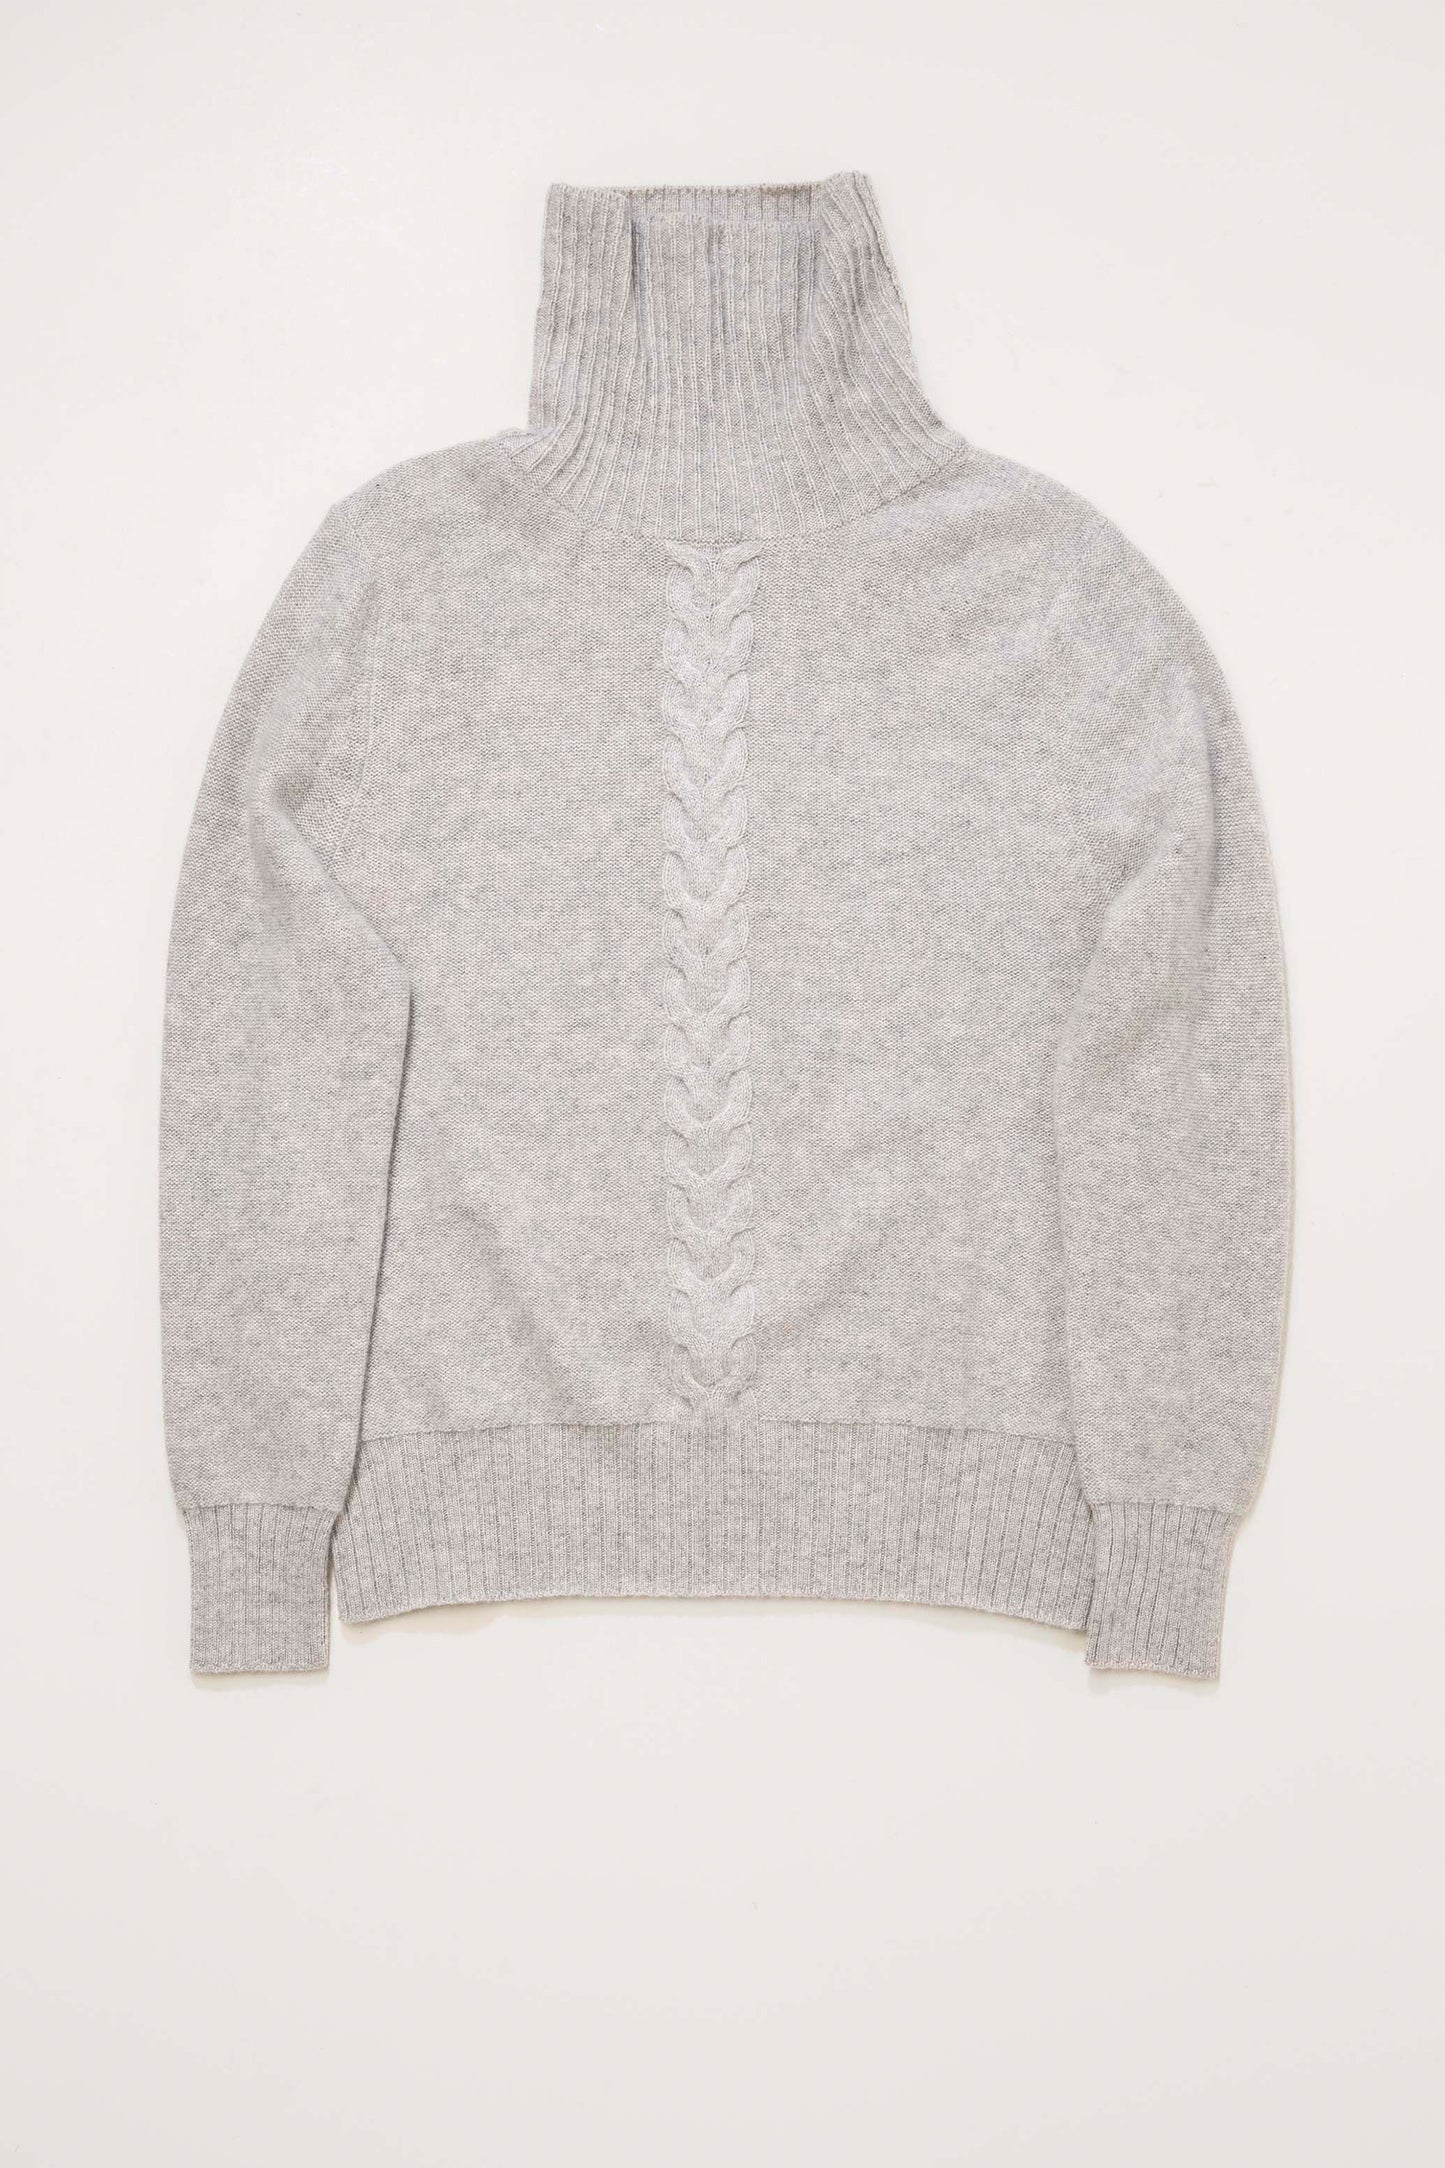 Women's Cable Knit Polo Neck Jumper - Grey